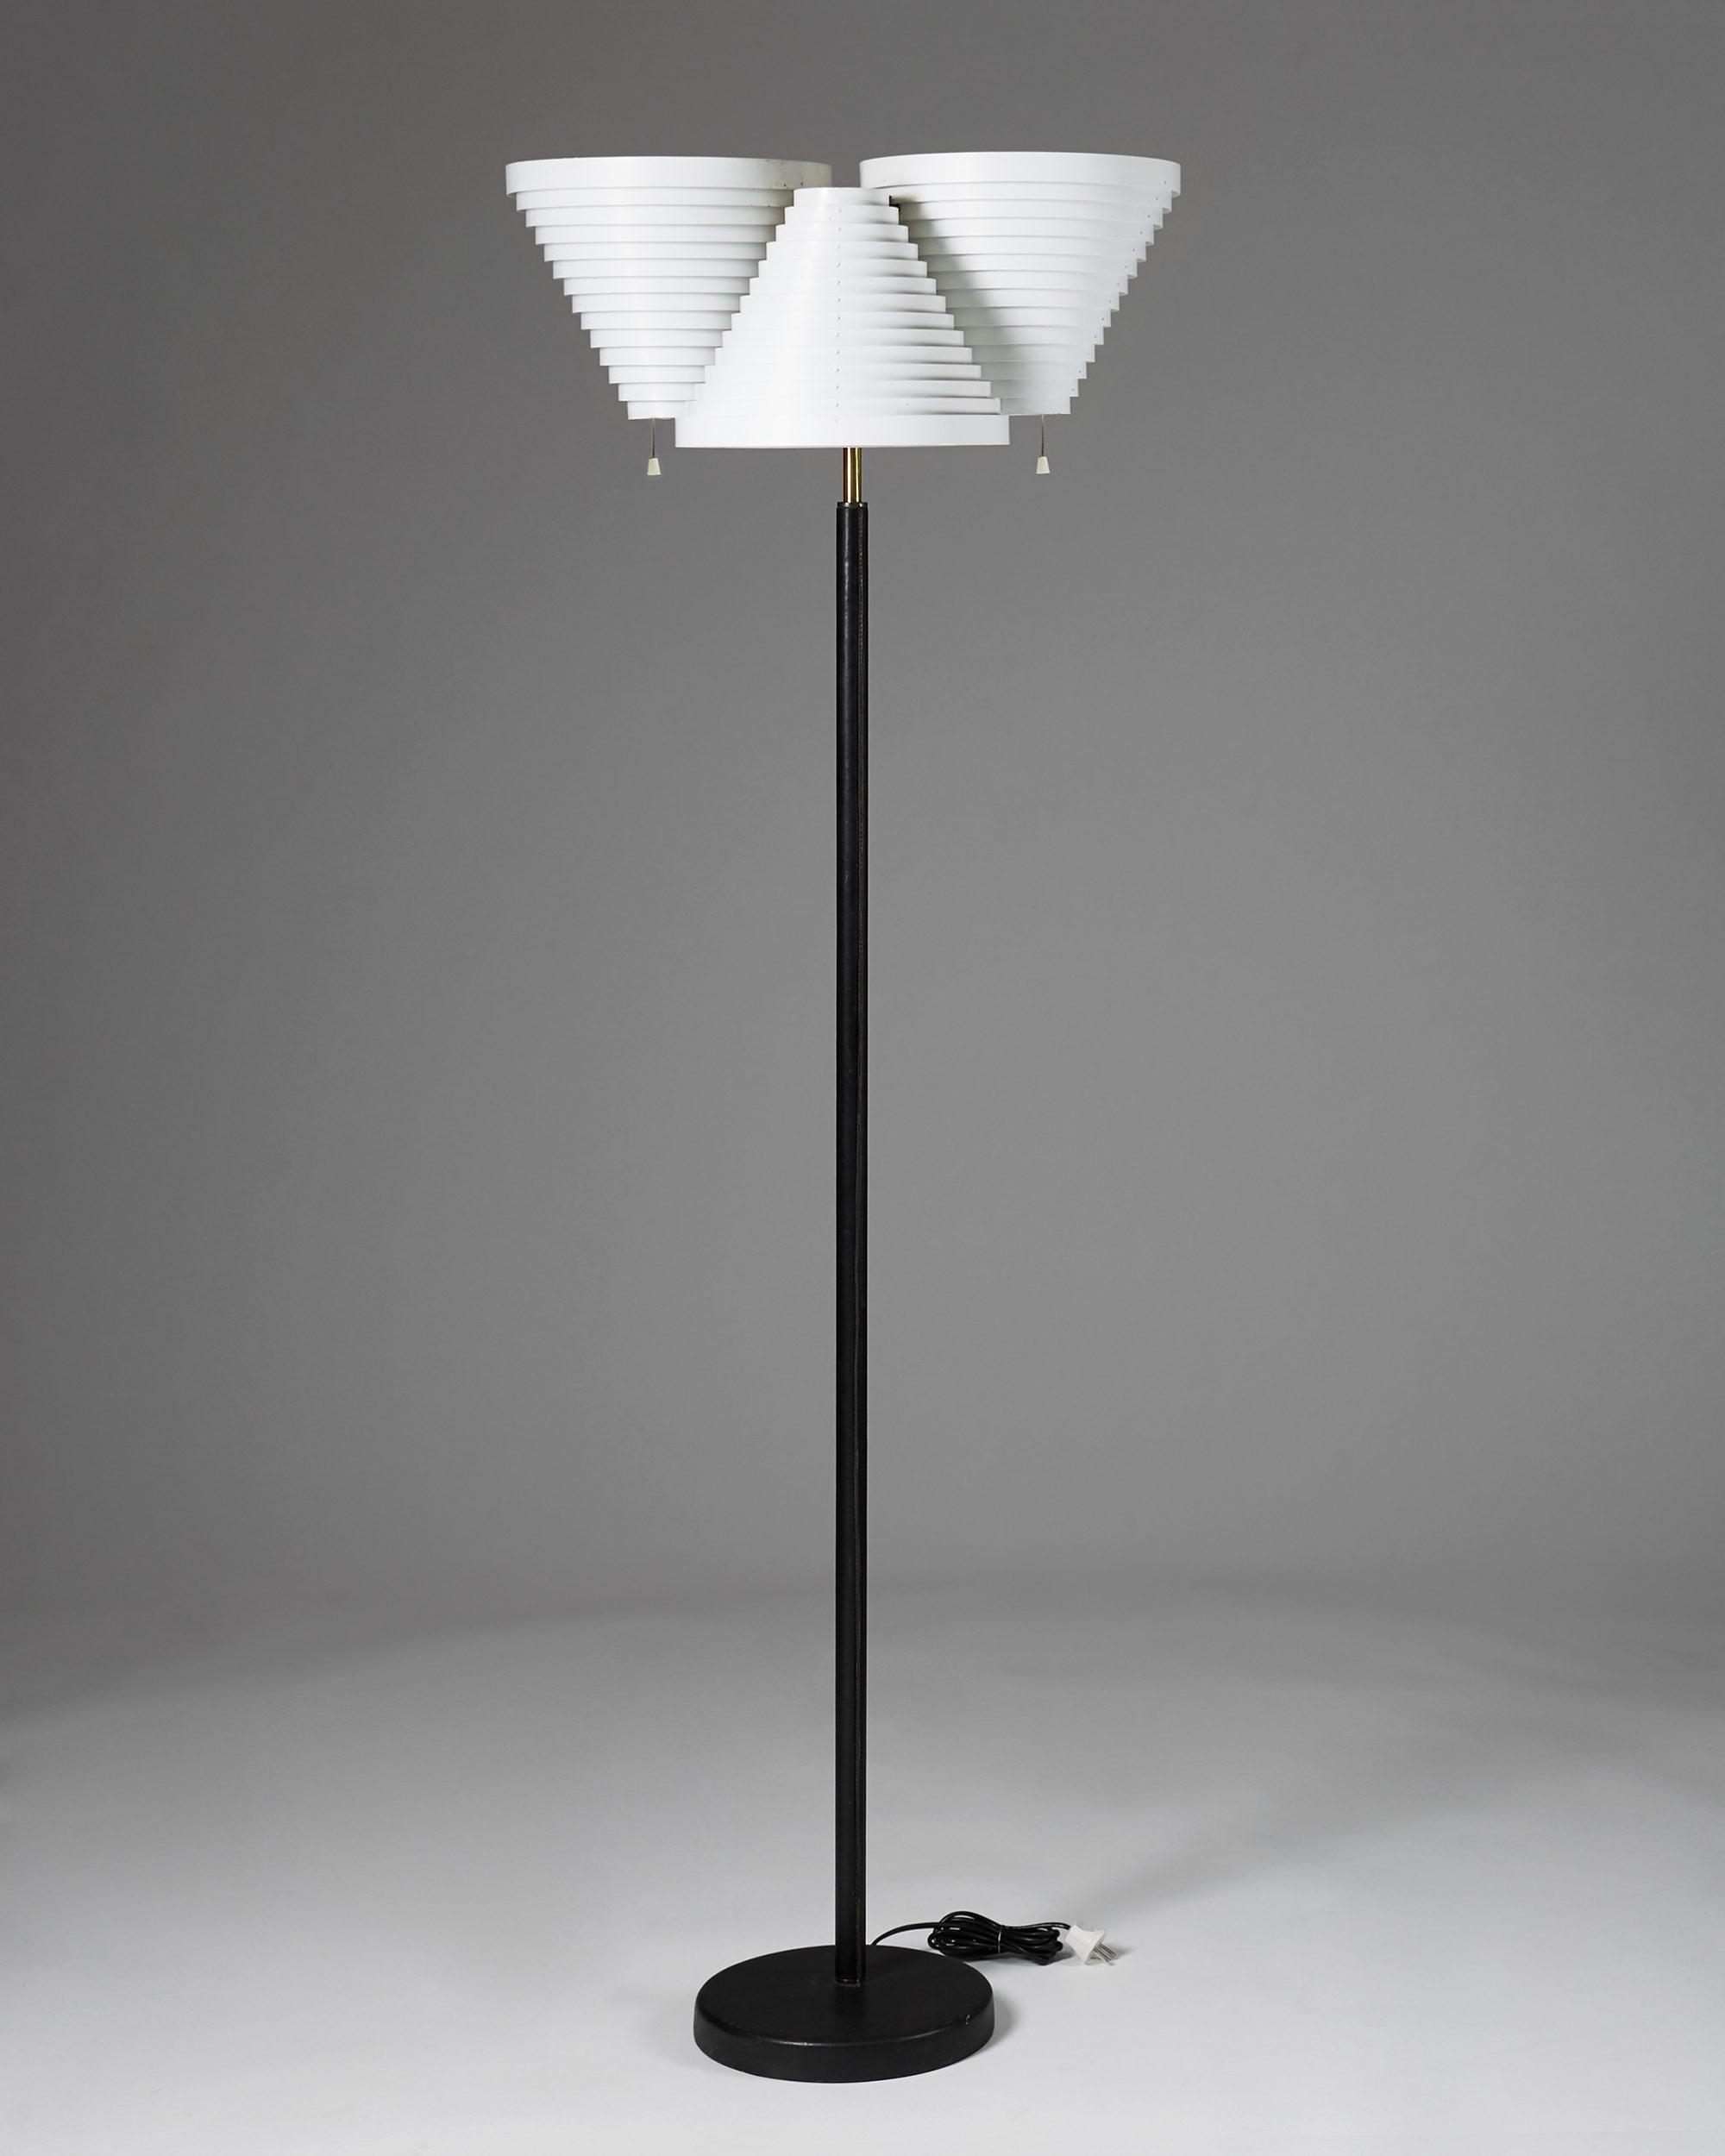 Floor lamp model A809 designed by Alvar Aalto for Valaistustyö,
Finland. 1959.

Lacquered steel, brass and leather.

Dimensions:
H: 170 cm/ 5' 7 1/4''
W: 60 cm/ 2'
D: 40 cm/ 15 3/4''

Alvar Aalto was a Finnish architect and designer. His work